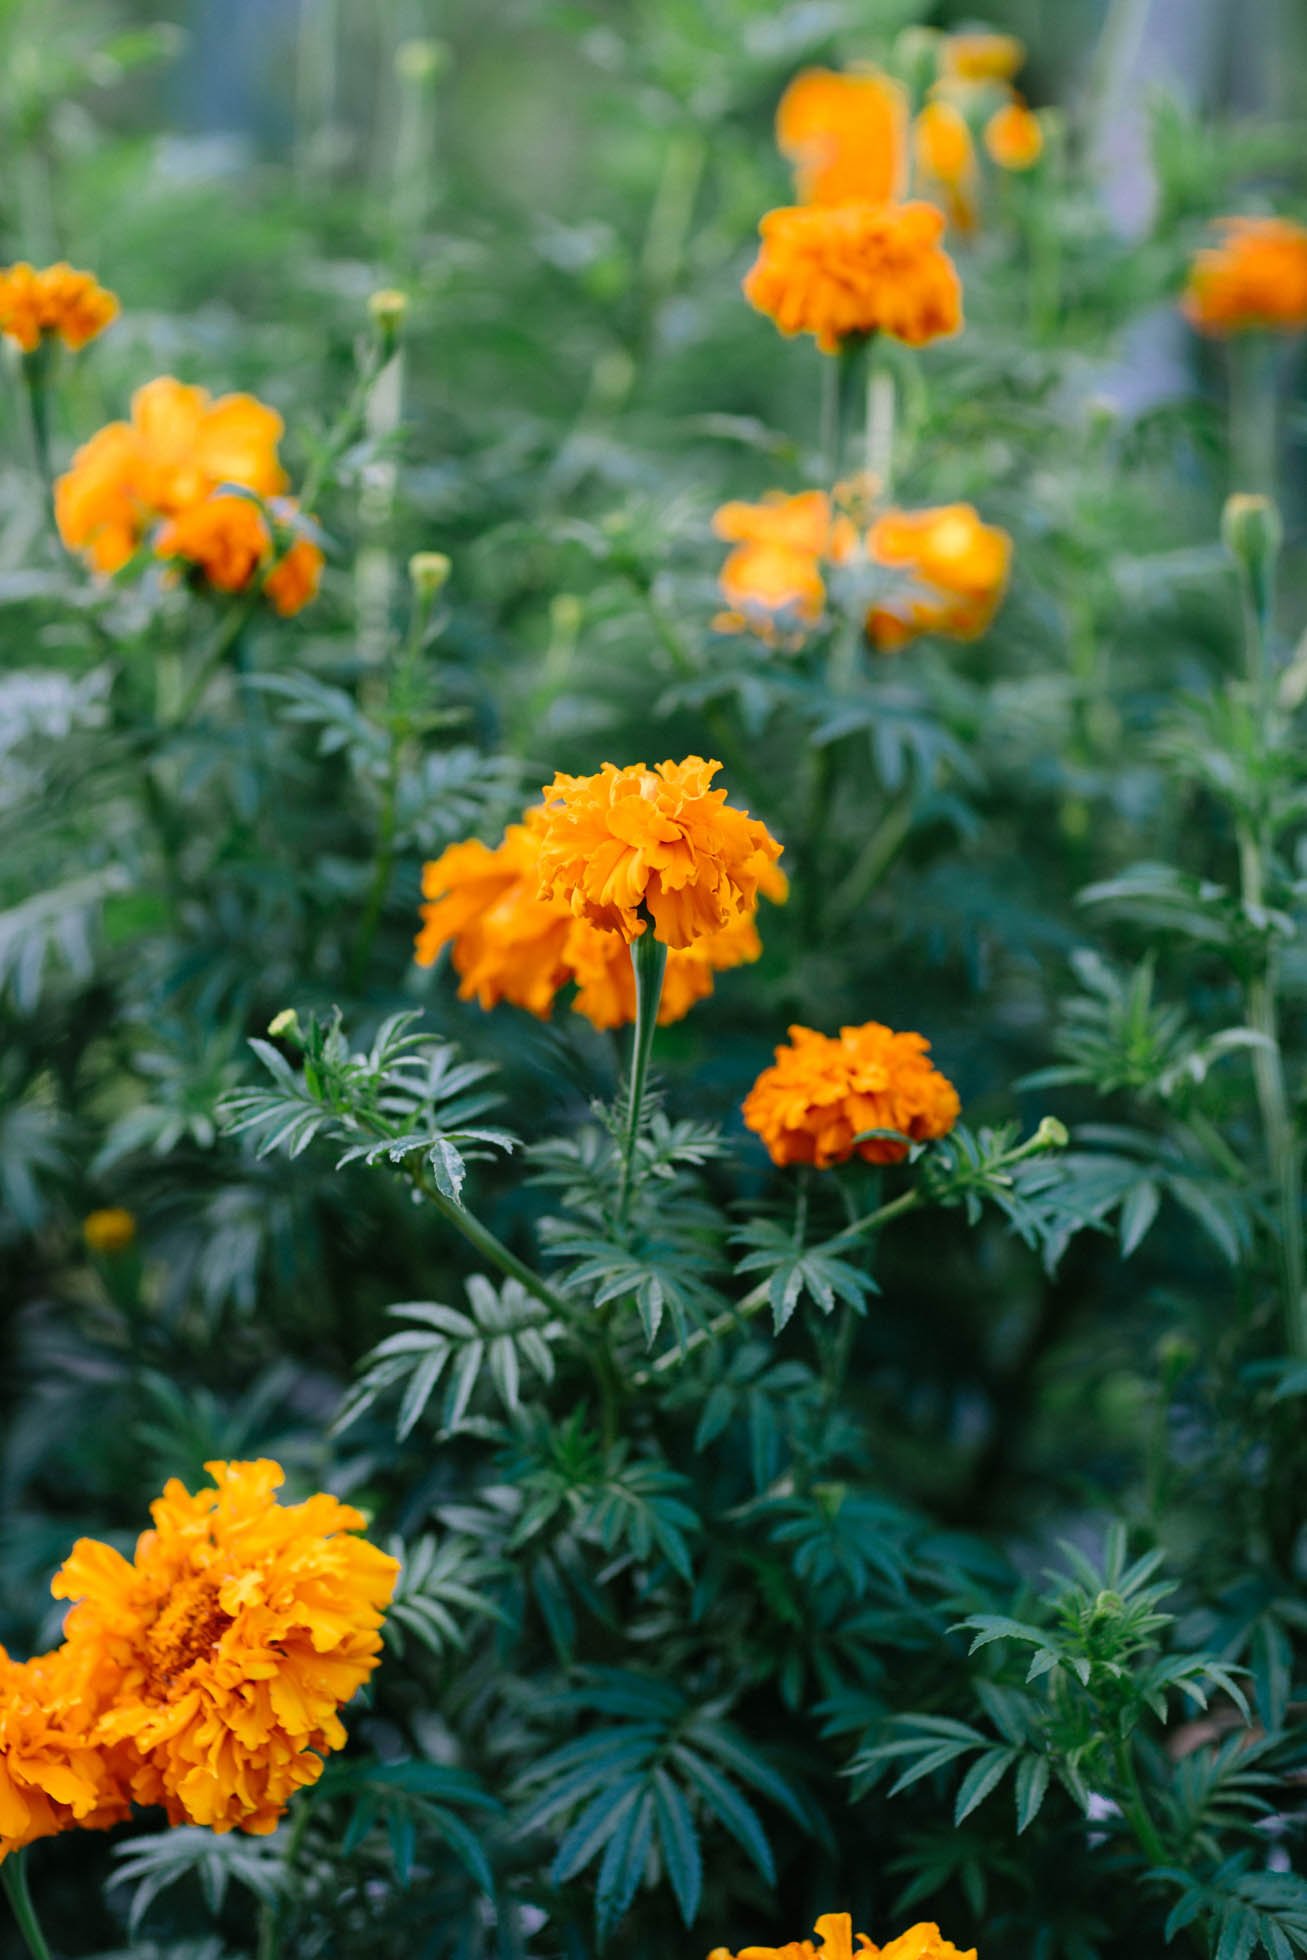  Some  tagetes erecta , also known as marigold, is ready for harvest in a community garden. After harvest, the marigold will be used in teas to alleviate cramps and indigestion. The flower also adds a beautiful dash of orange to fresh garden salads. 